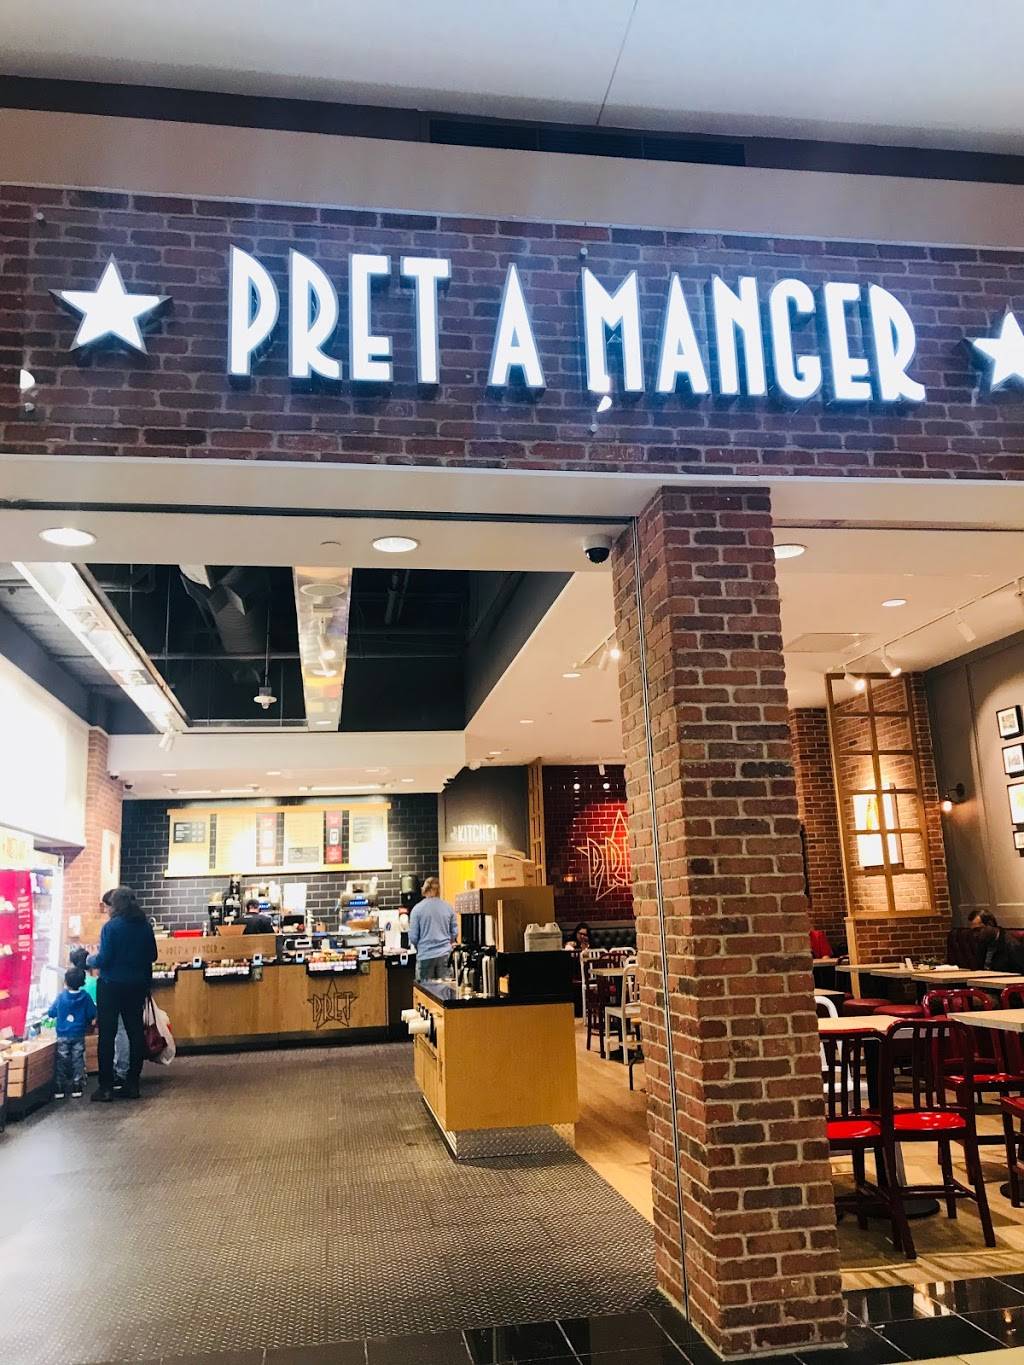 Pret A Manger | cafe | 30 Mall Dr W, Jersey City, NJ 07310, USA | 2012175601 OR +1 201-217-5601